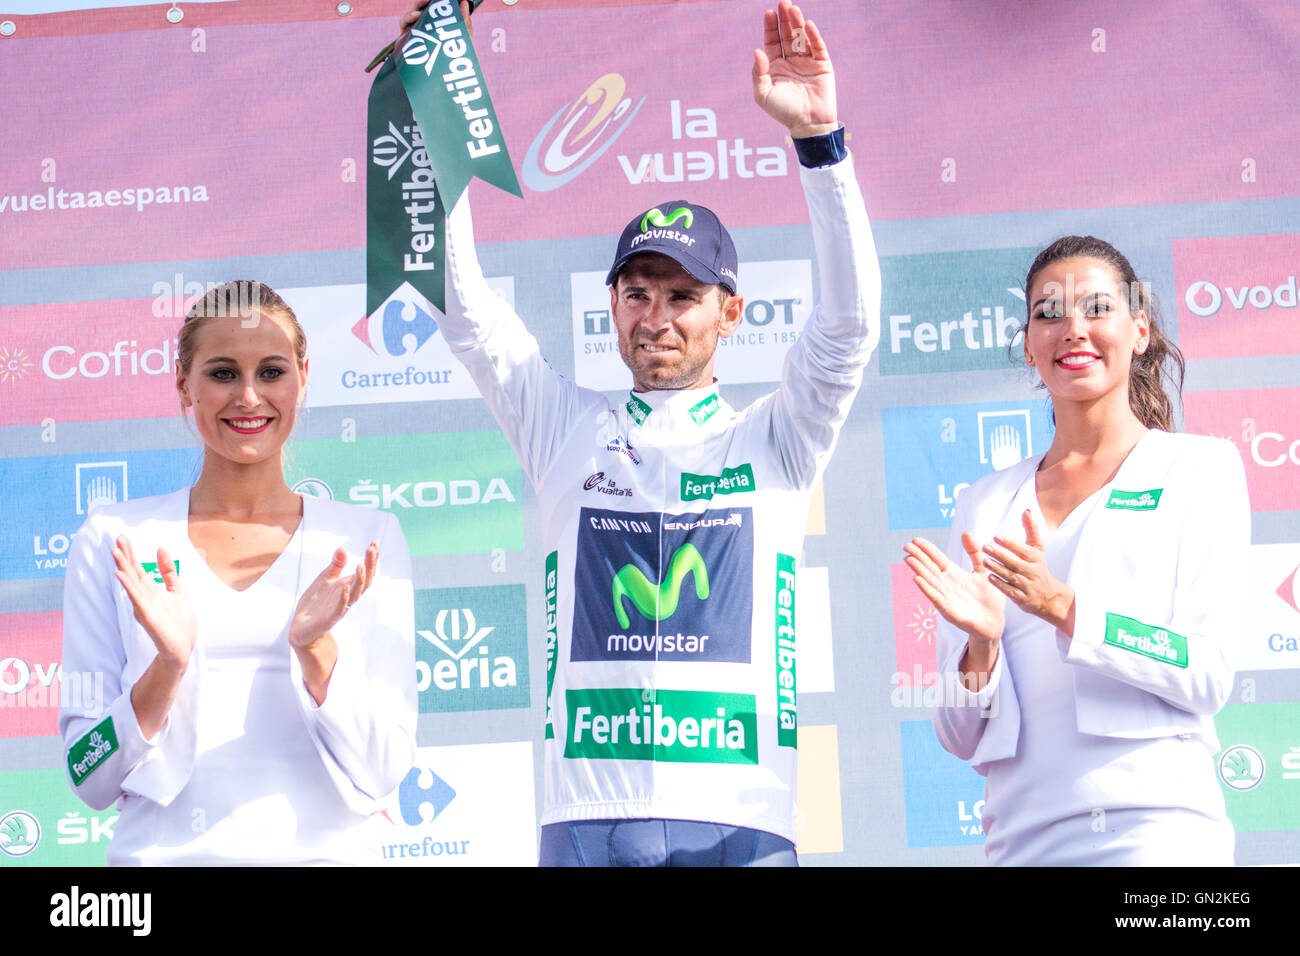 La Camperona, Spain. 27th August, 2016. Alejandro Valverde (Movistar Team) with combinated maillot at the podium of 8th stage of cycling race ‘La Vuelta a España’ (Tour of Spain) between Villalpando and Climb of La Camperona on August 27, 2016 in Leon, Spain. Credit: David Gato/Alamy Live News Stock Photo